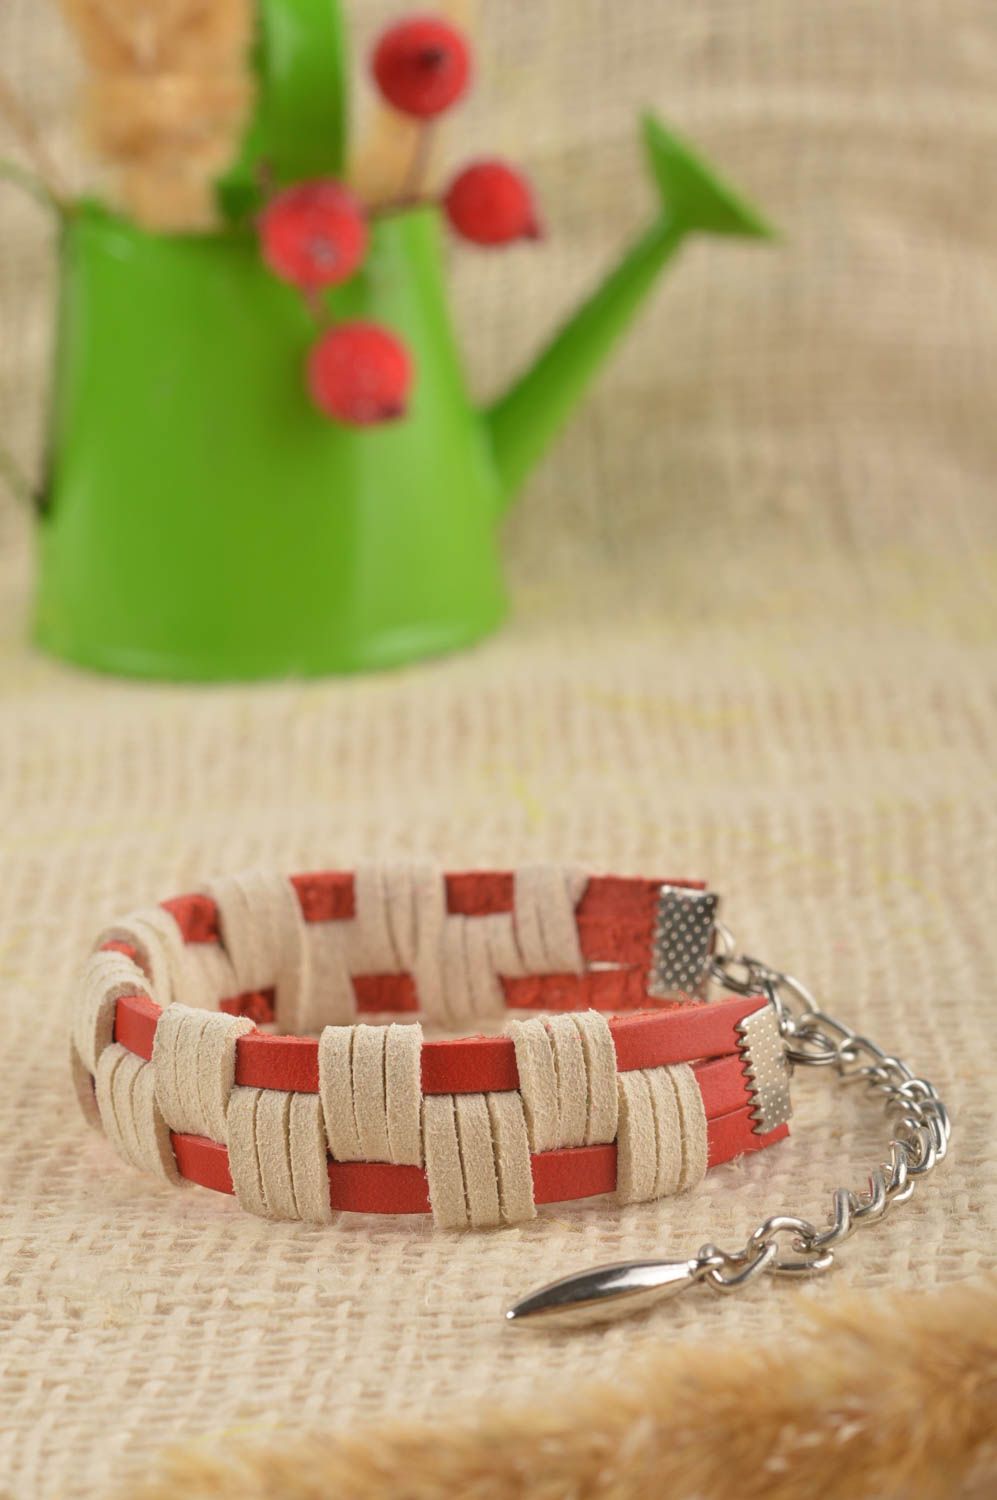 Unusual handmade leather bracelet designs cool jewelry gifts for her photo 1